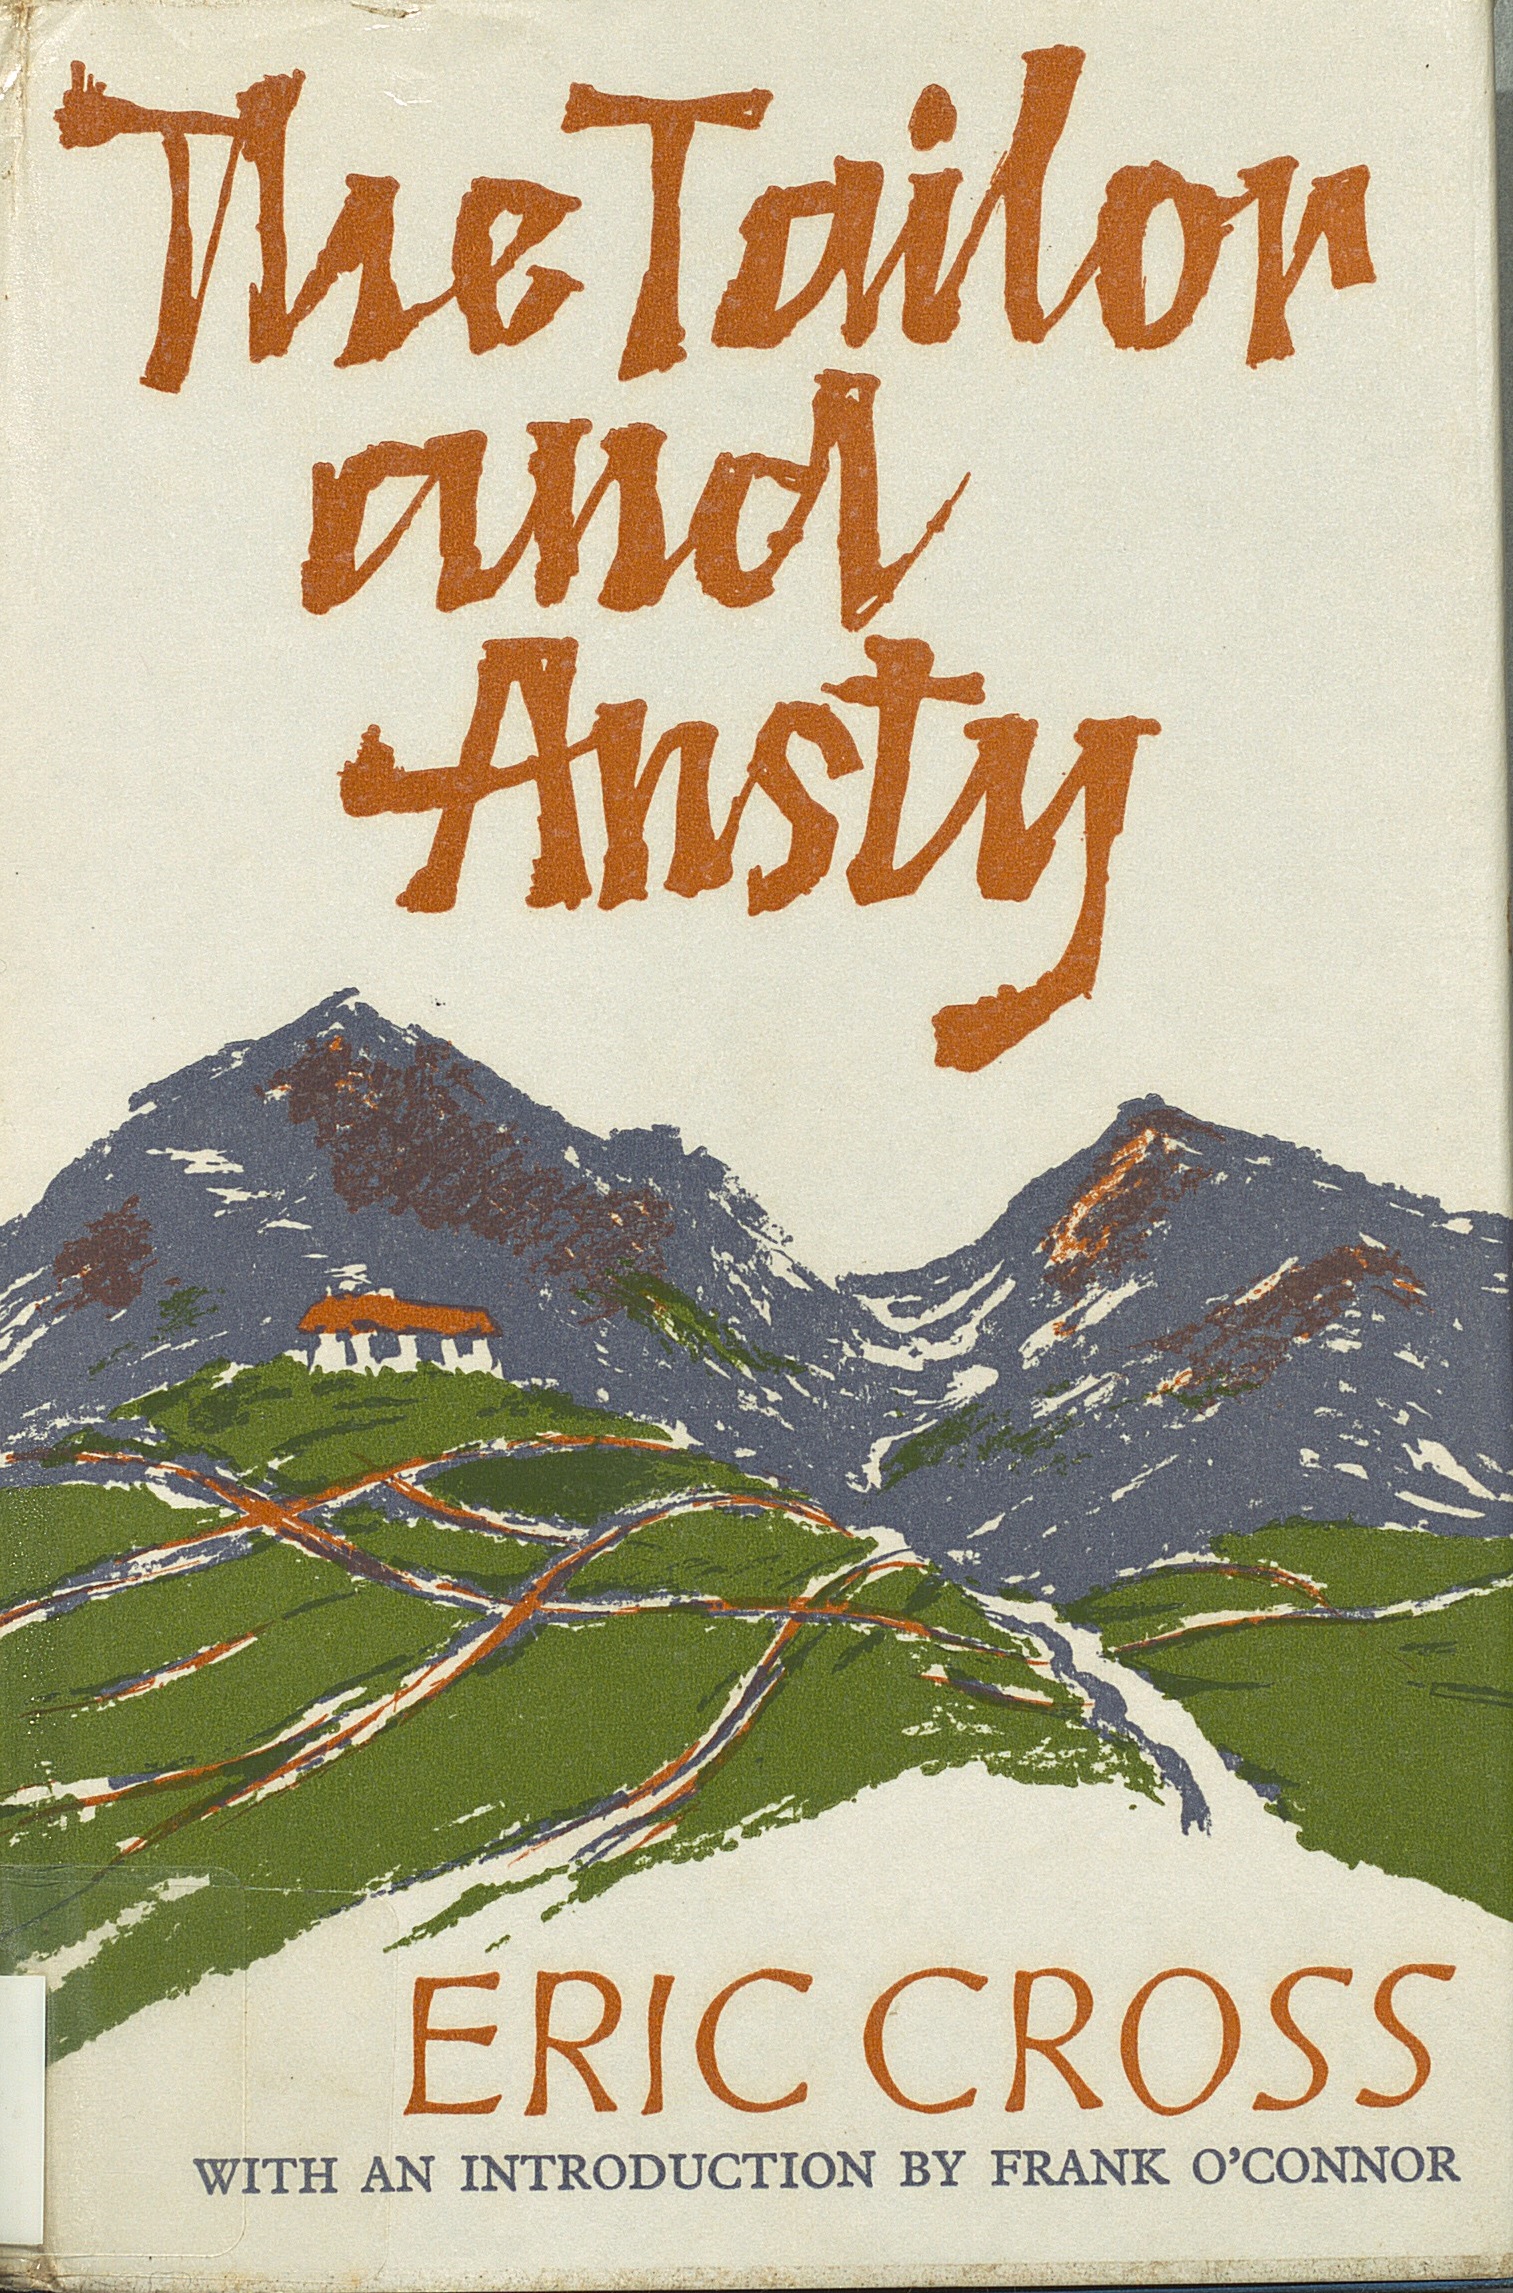 Dust-jacket to the 1964 edition of The Tailor and Ansty. There is a house on a hill with mountains in the background.